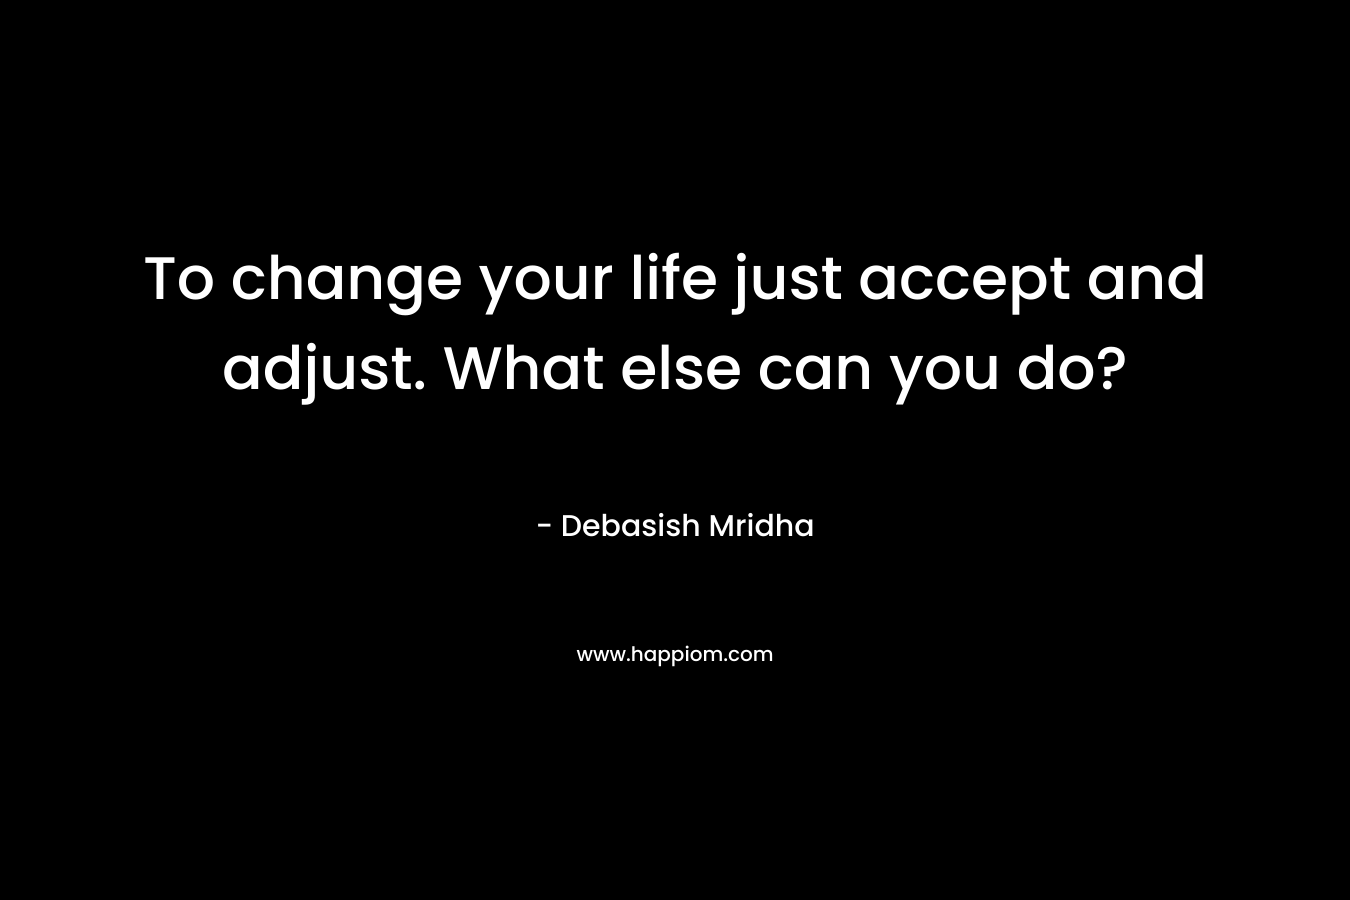 To change your life just accept and adjust. What else can you do?